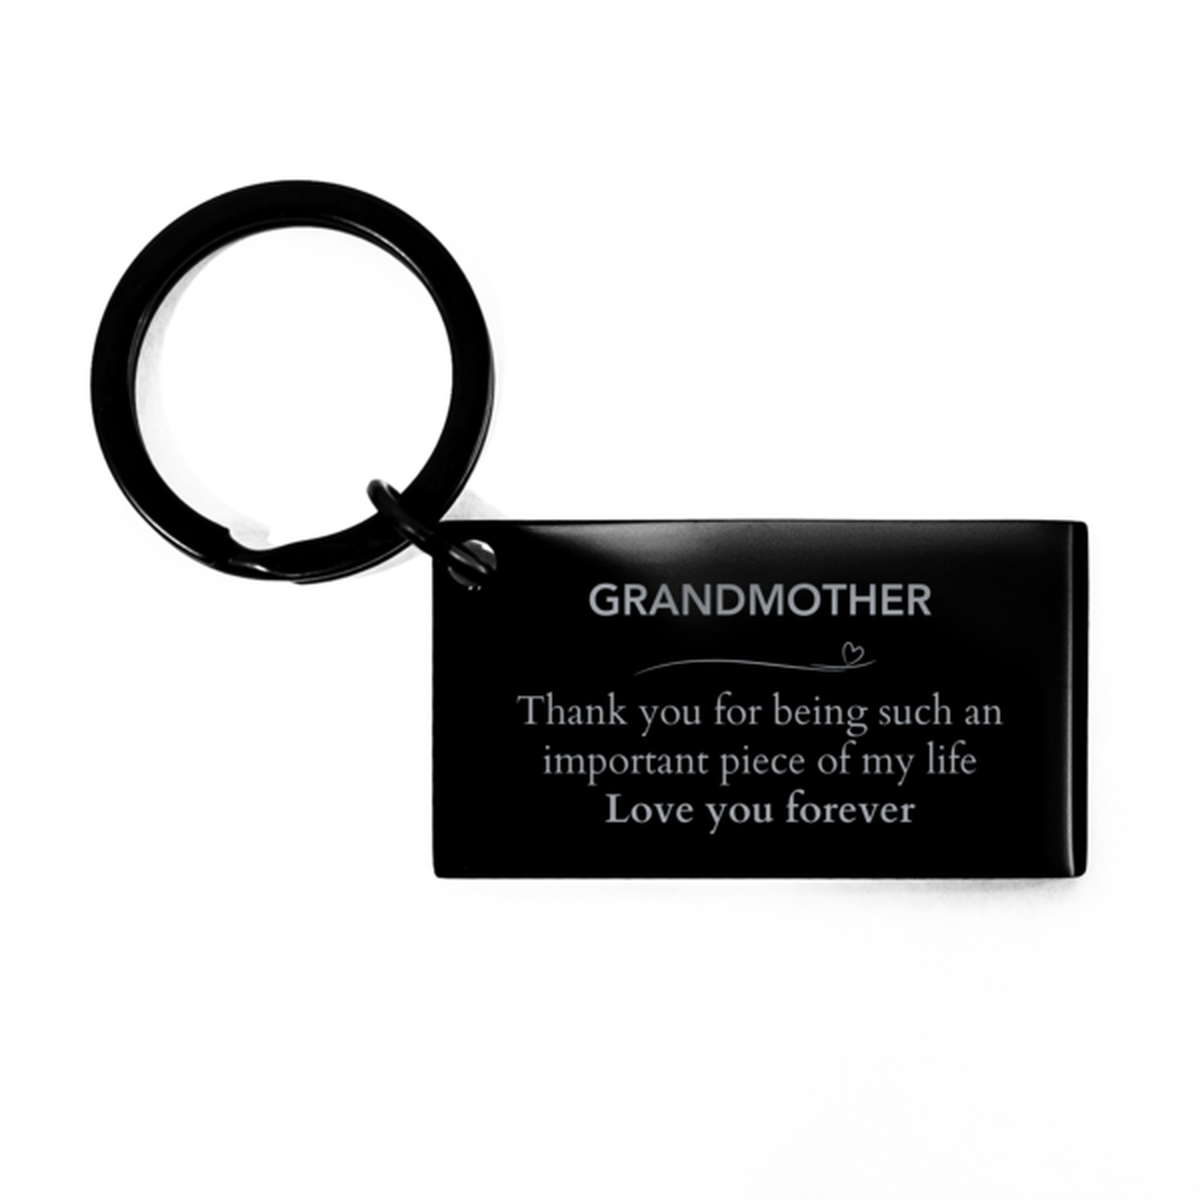 Appropriate Grandmother Keychain Epic Birthday Gifts for Grandmother Thank you for being such an important piece of my life Grandmother Christmas Mothers Fathers Day